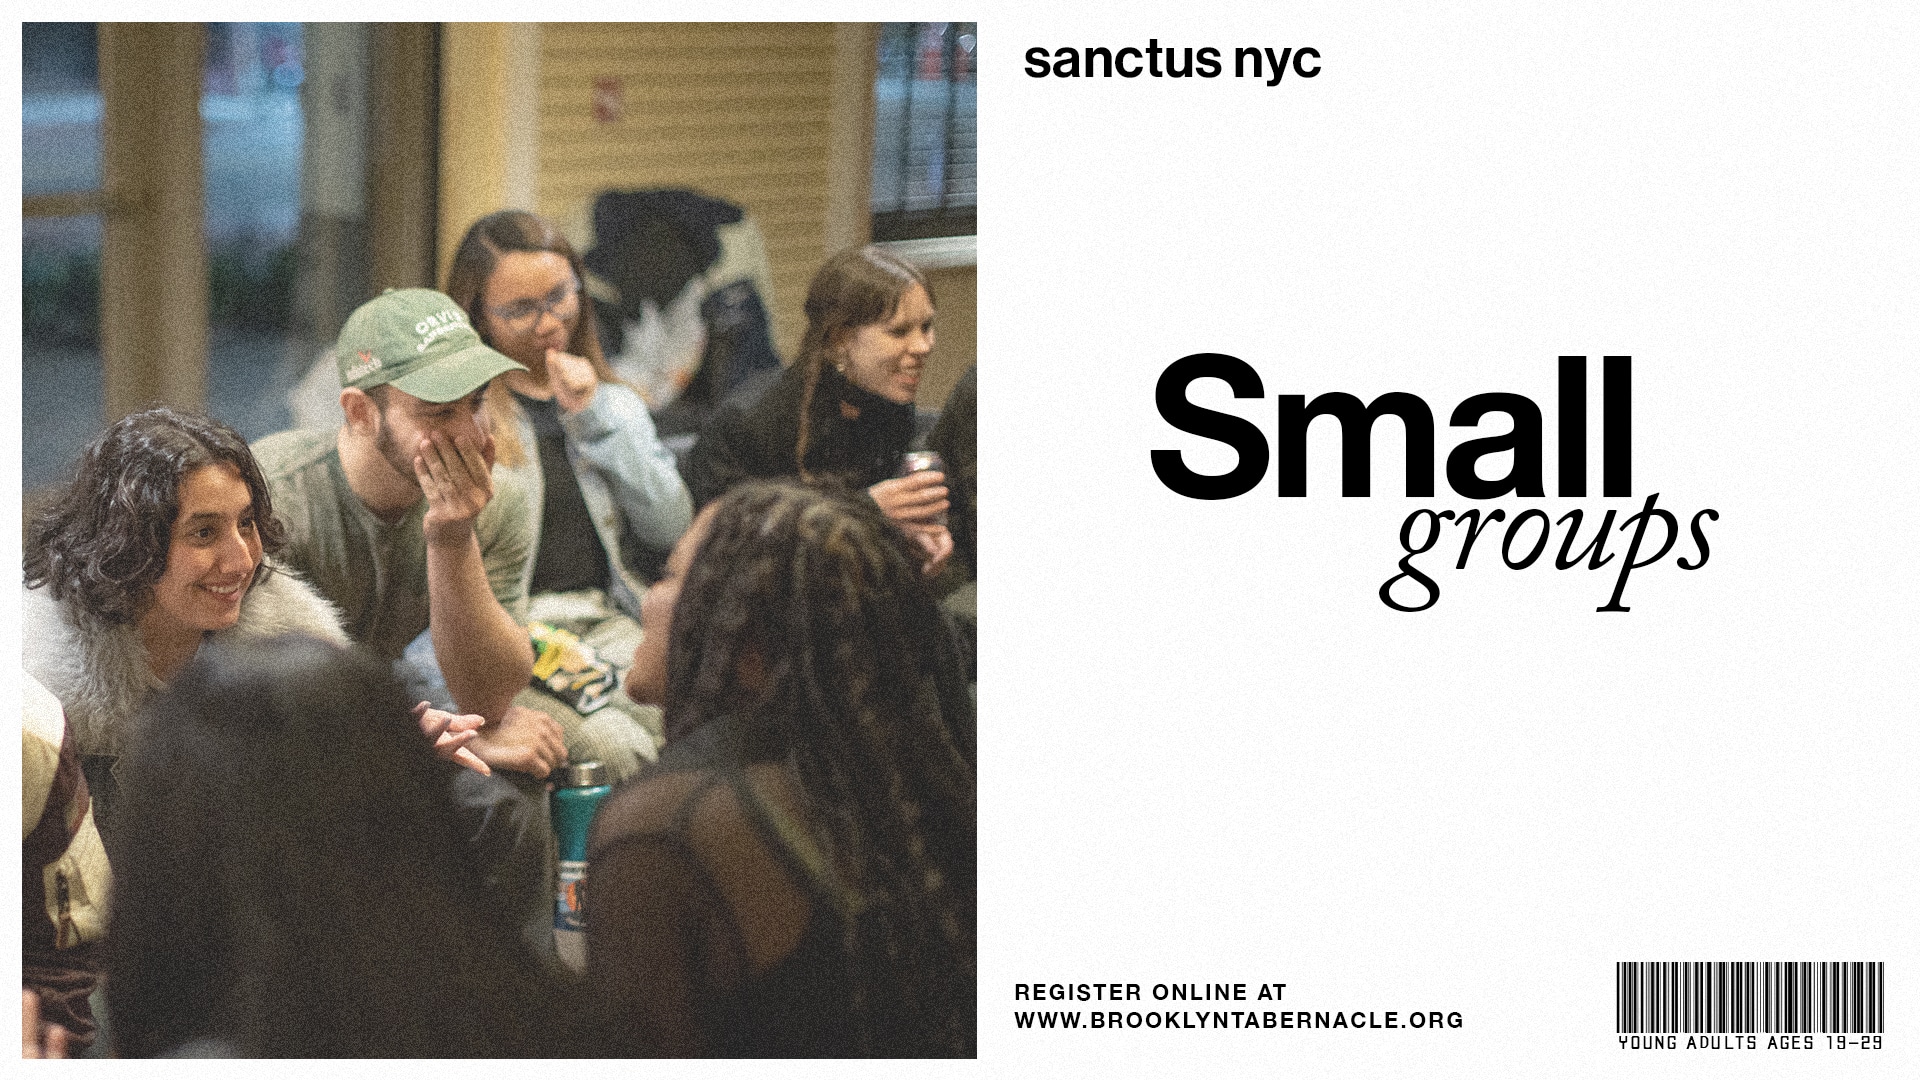 The Brooklyn Tabernacle Sanctus NYC Small Groups registration thumbnail - A group of young adults smiling